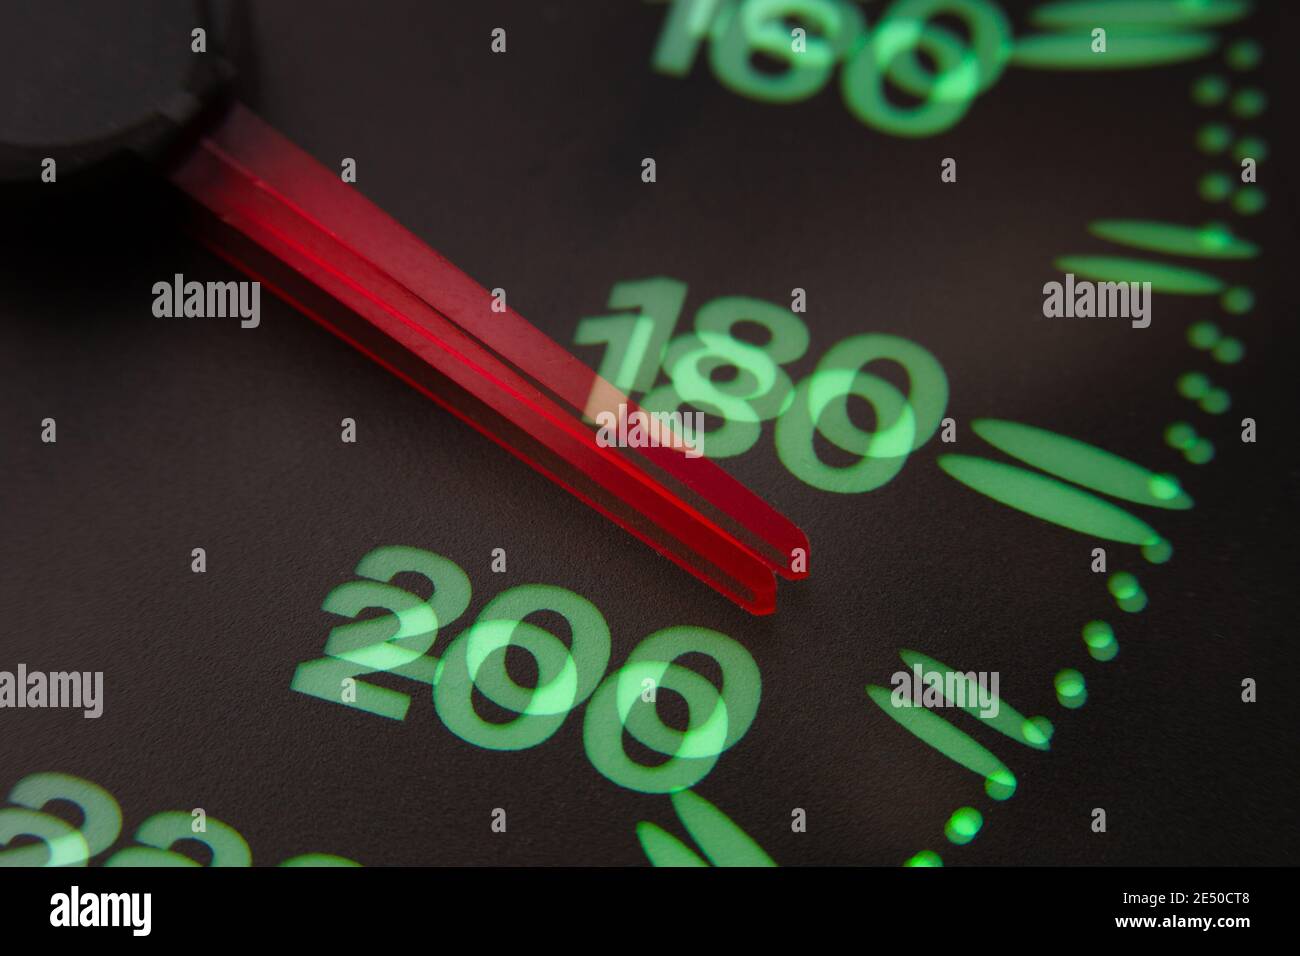 Double vision drunk driver. Car speedometer at 190 km / h Stock Photo